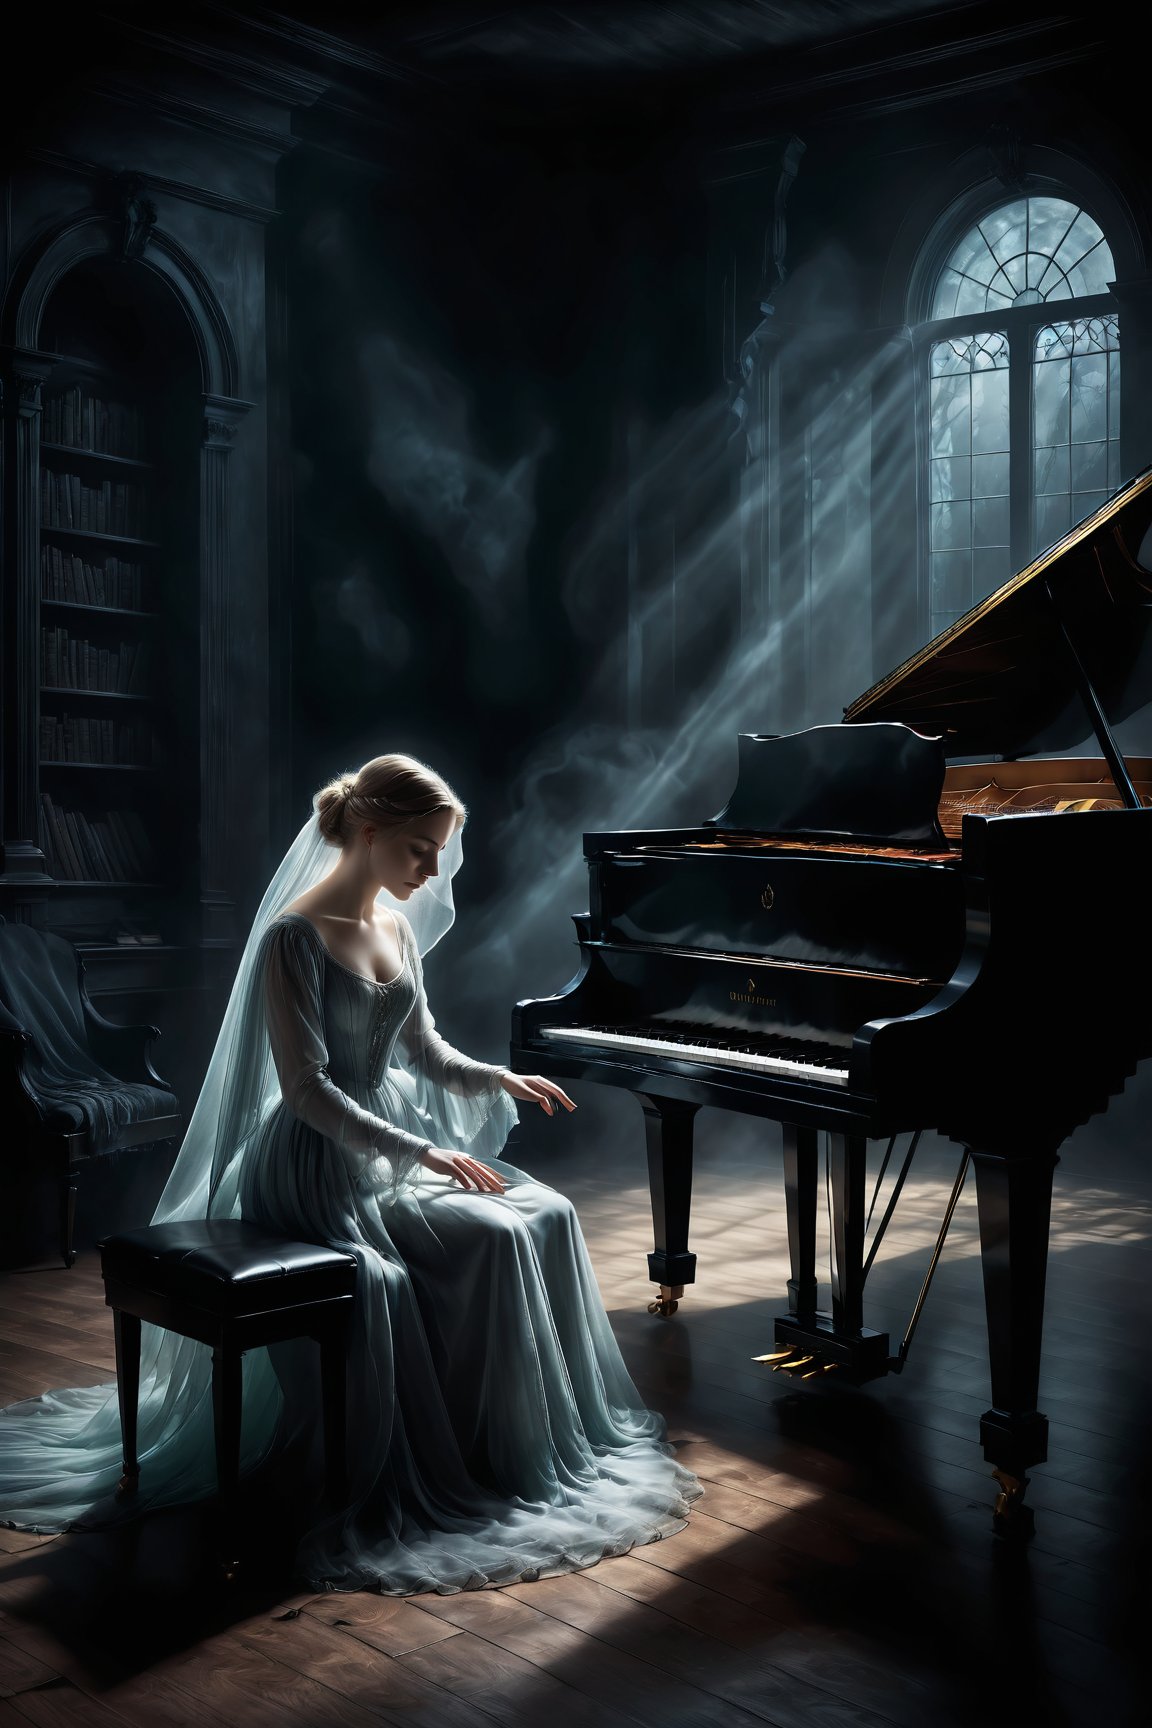 a haunting and ethereal digital painting of a ghostly figure playing a melancholic melody on a grand piano, surrounded by an enchanted audience entranced by the music, oblivious to the dark and eerie surroundings. The ghostly figure is partially transparent, emitting a soft glow, with flowing ethereal robes. The grand piano is intricately detailed, with delicate looks and a weathered appearance. The composition is dynamic and atmospheric, with muted colors and dramatic lighting, evoking a sense of mystery and foreboding. Inspired by the works of classical painters like Caspar David Friedrich, this artwork captures the captivating and haunting nature of the scene. Created using digital painting techniques and rendered with realistic textures and lighting effects for a stunning and immersive visual experience.